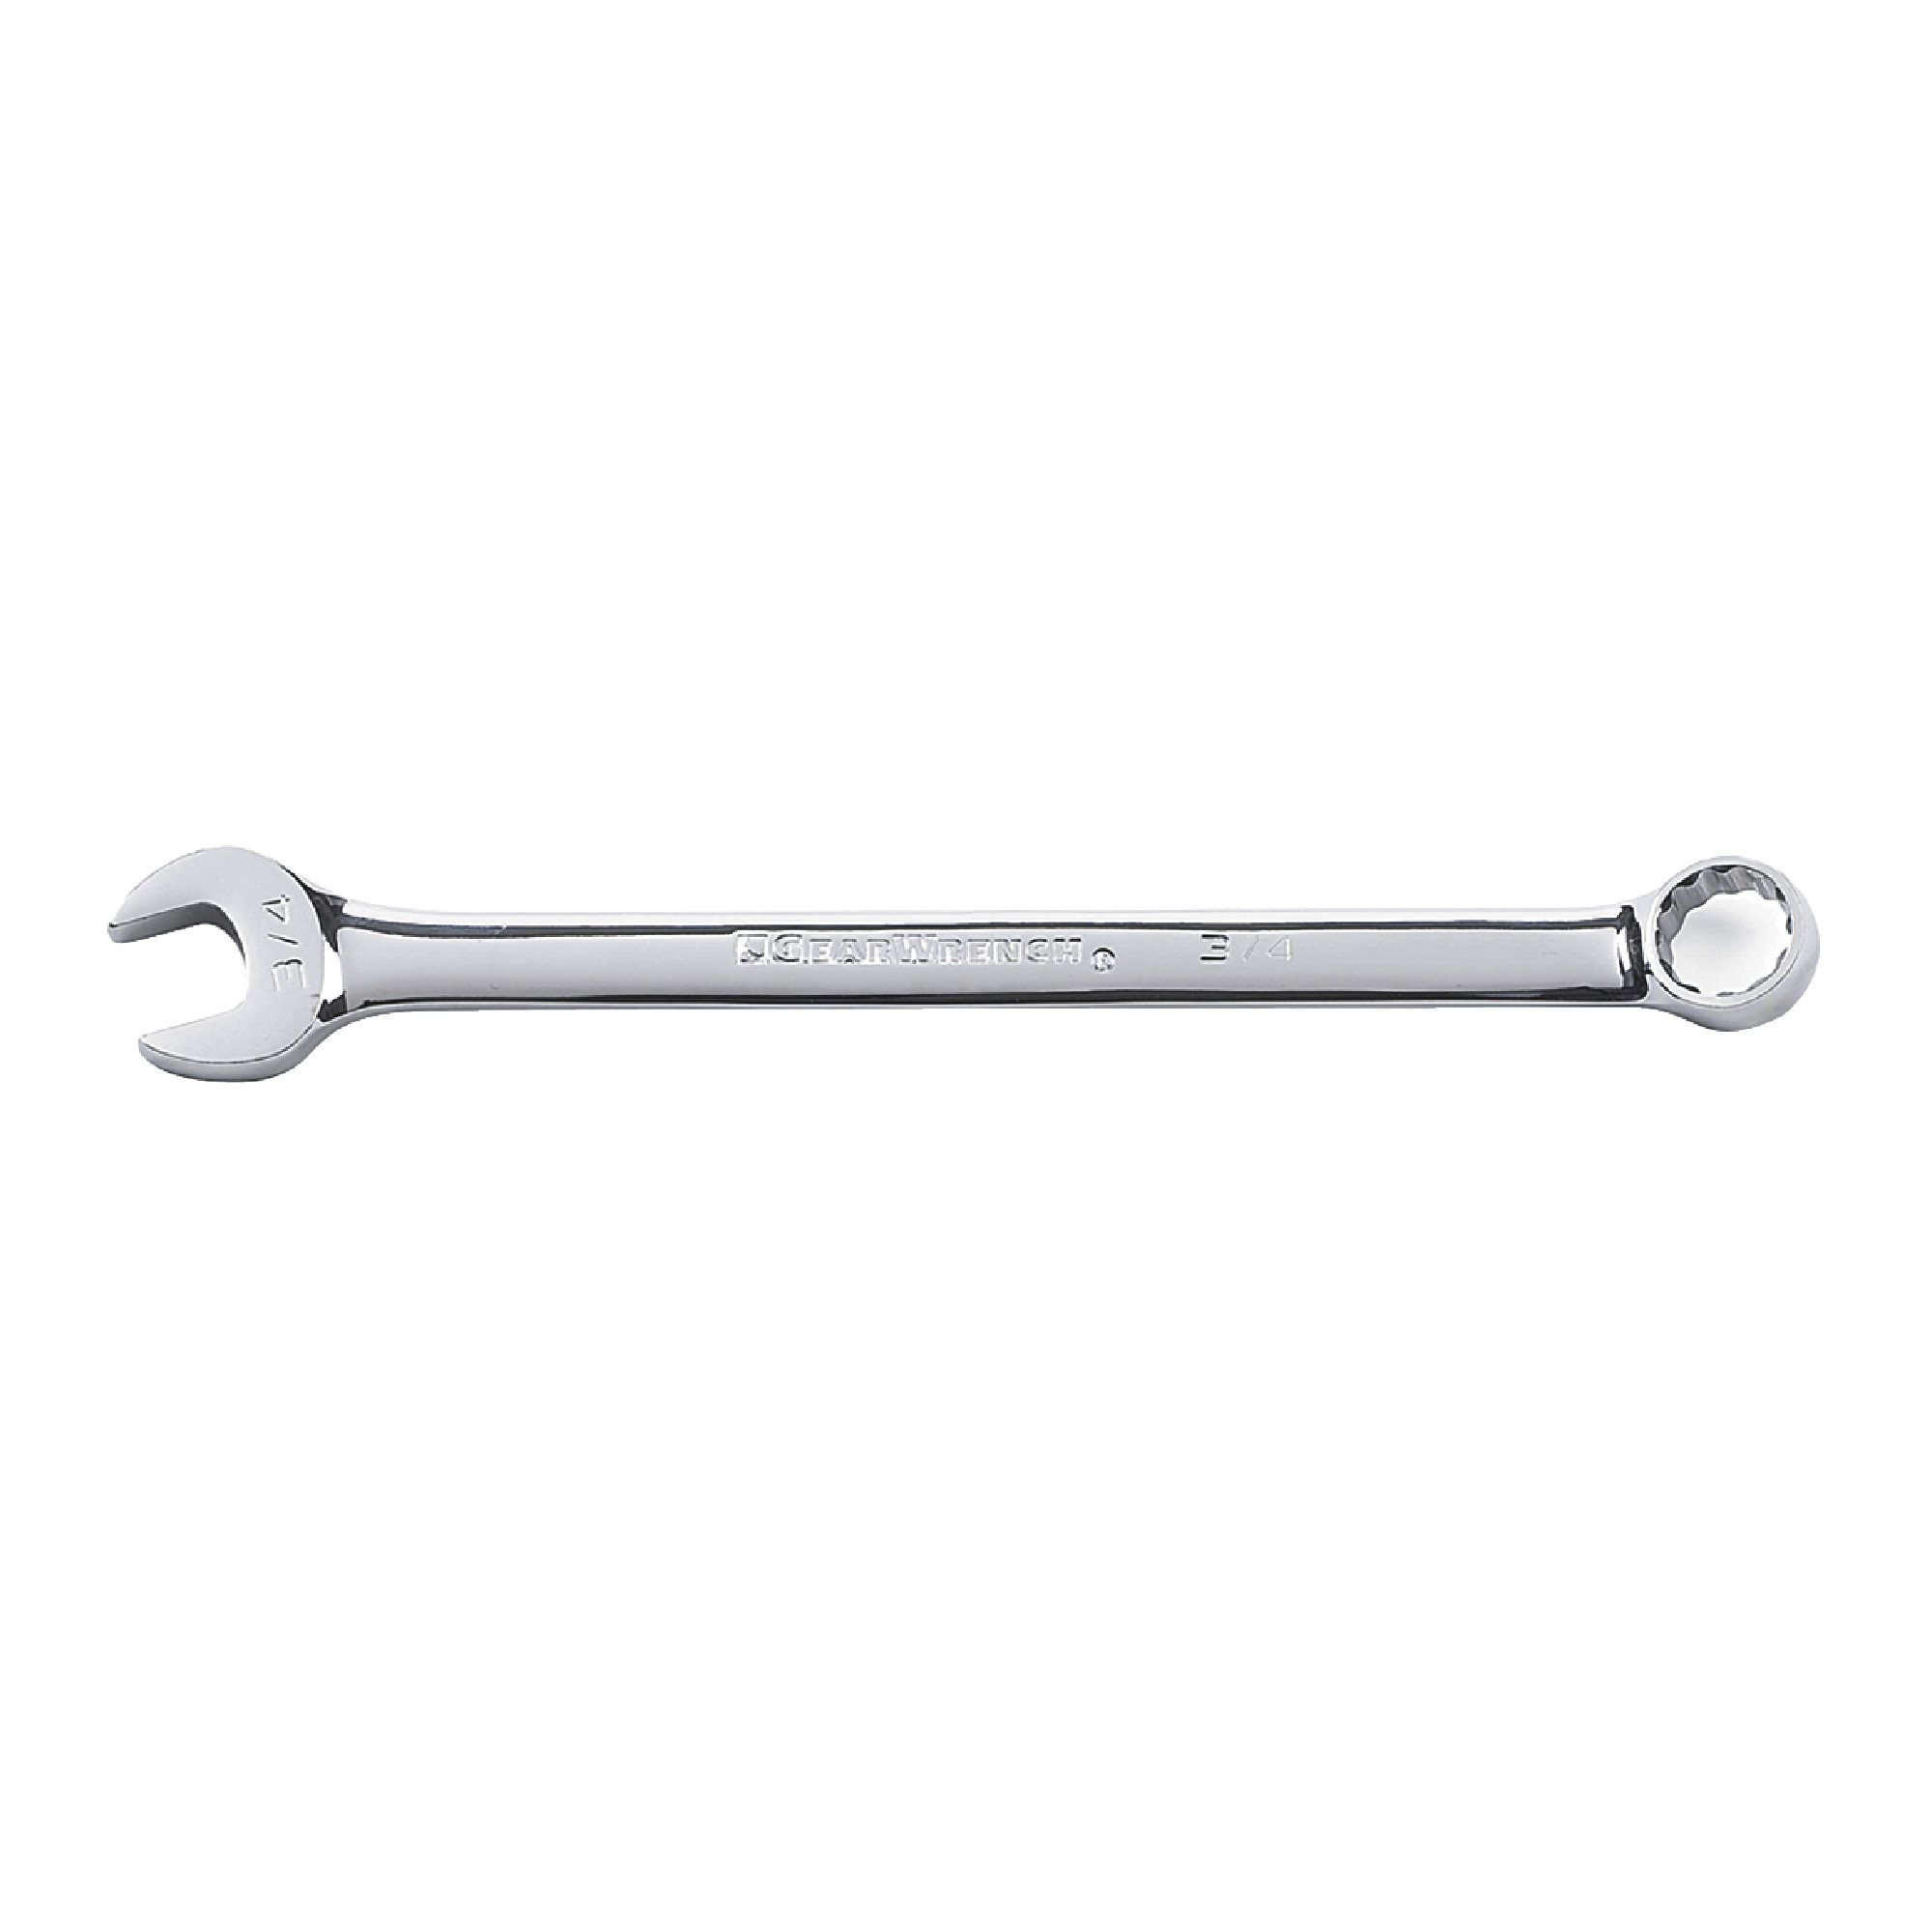 27mm 12 Point Long Pattern Combination Wrench